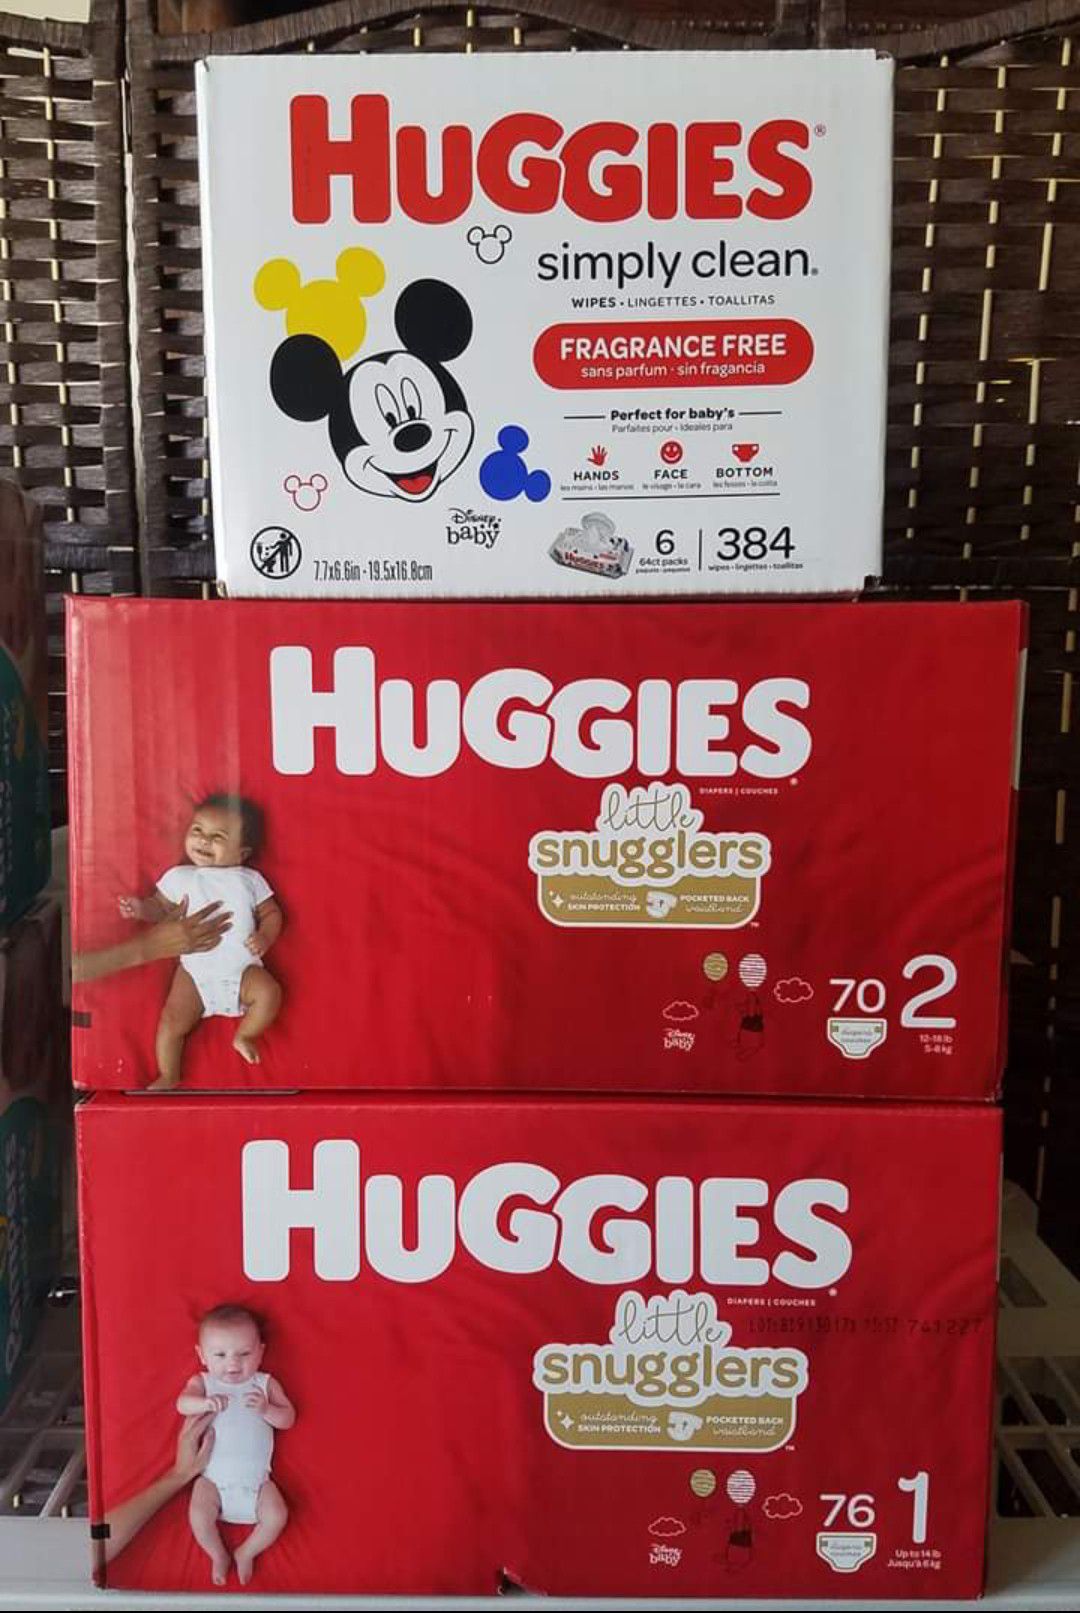 HUGGIES BABY BUNDLE. PICKUP ONLY. PHILADELPHIA BROAD AND OLNEY AREA. NO DELIVERY.